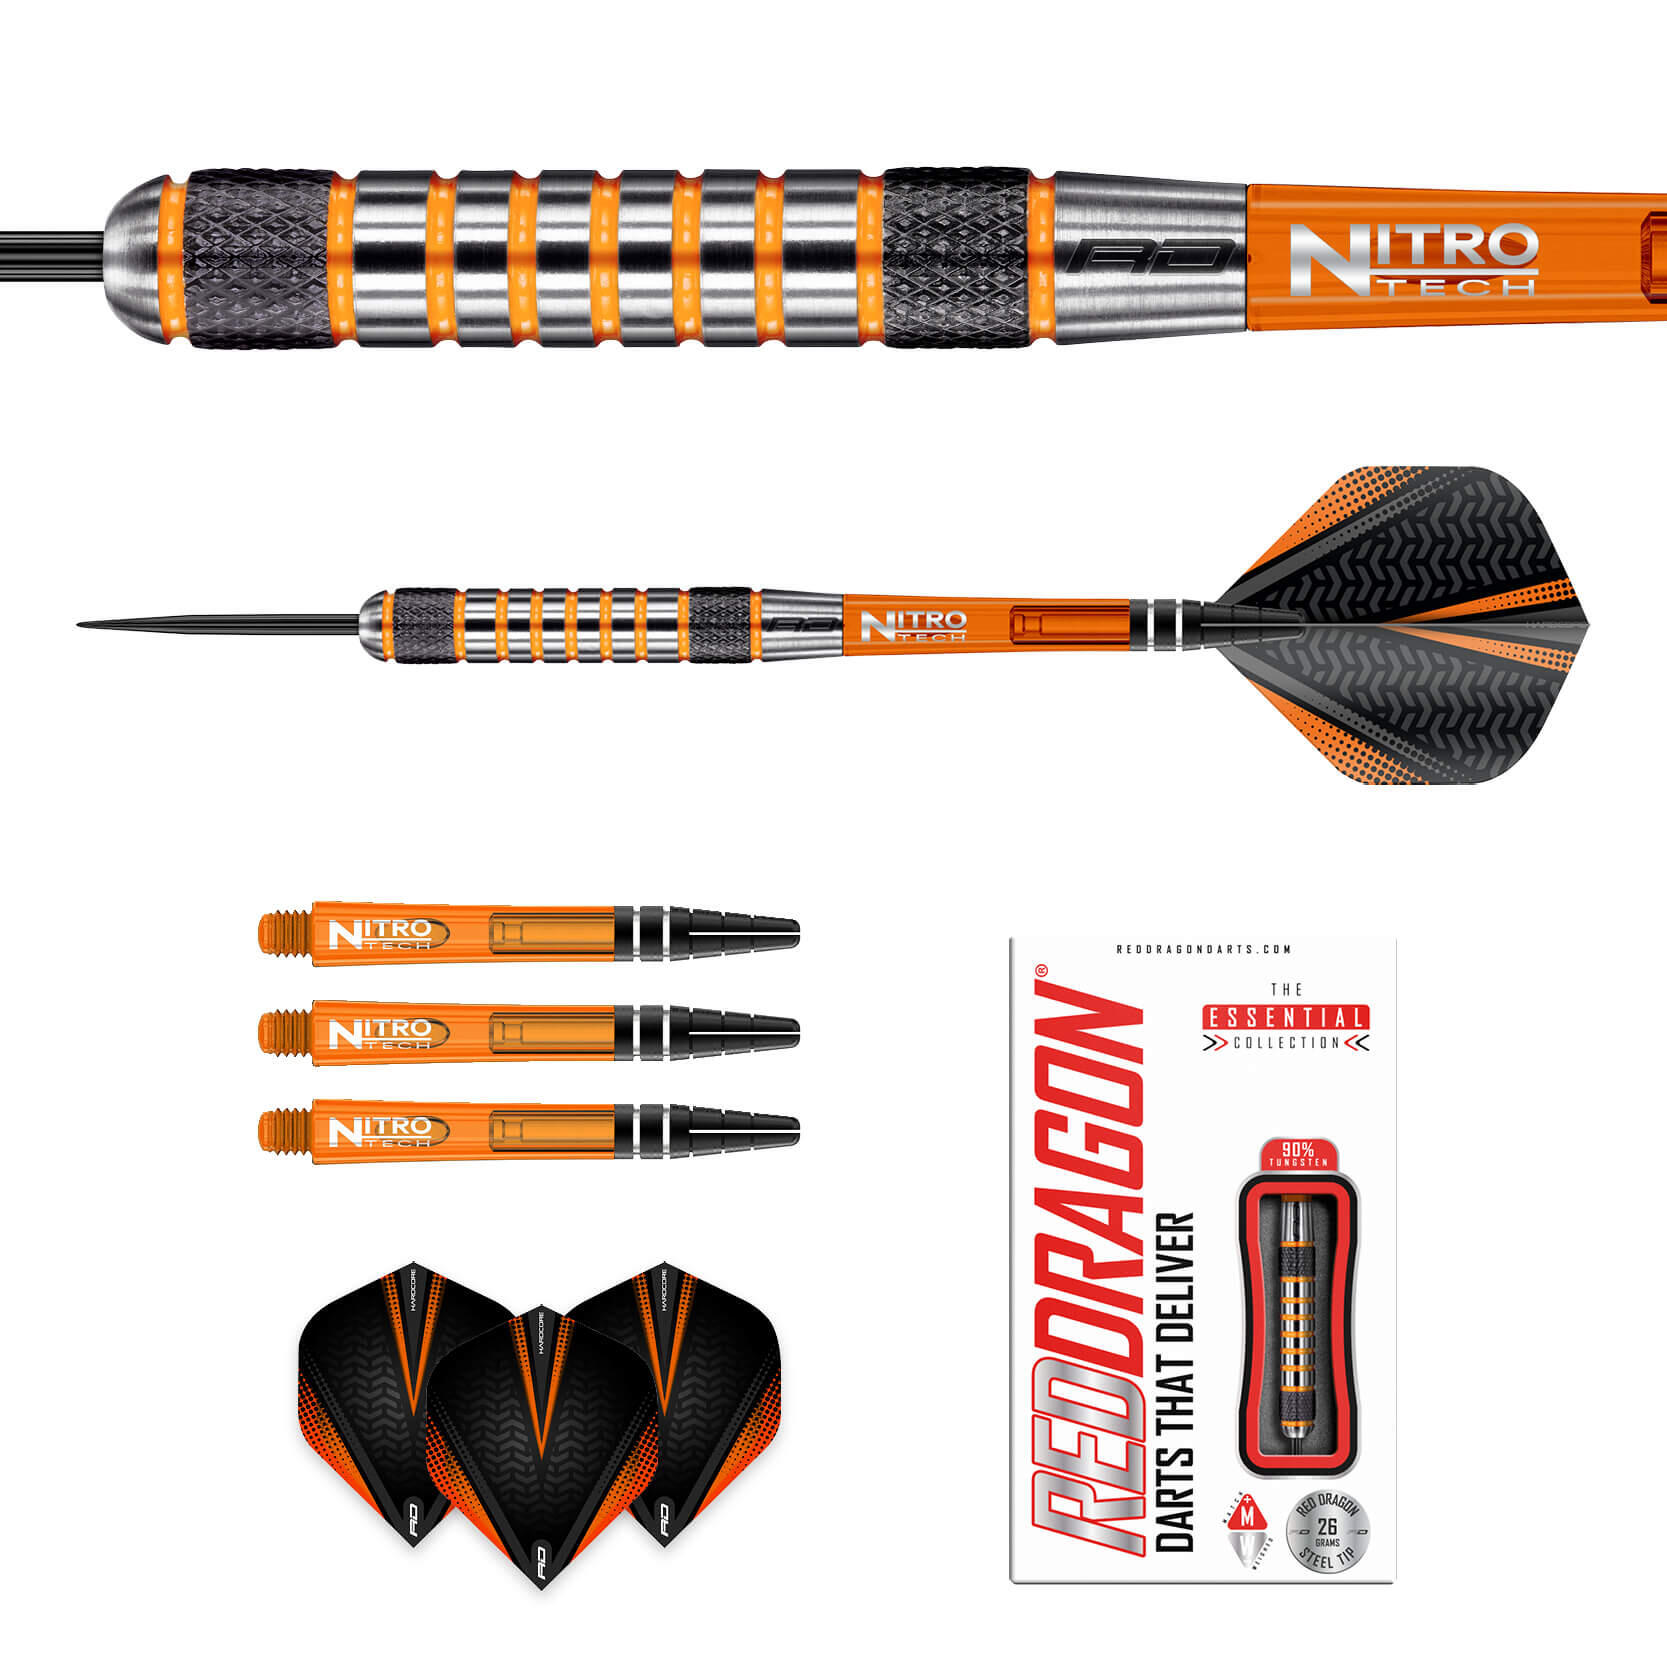 Amberjack 7: 26g Tungsten Darts Set with Flights and Stems 4/5